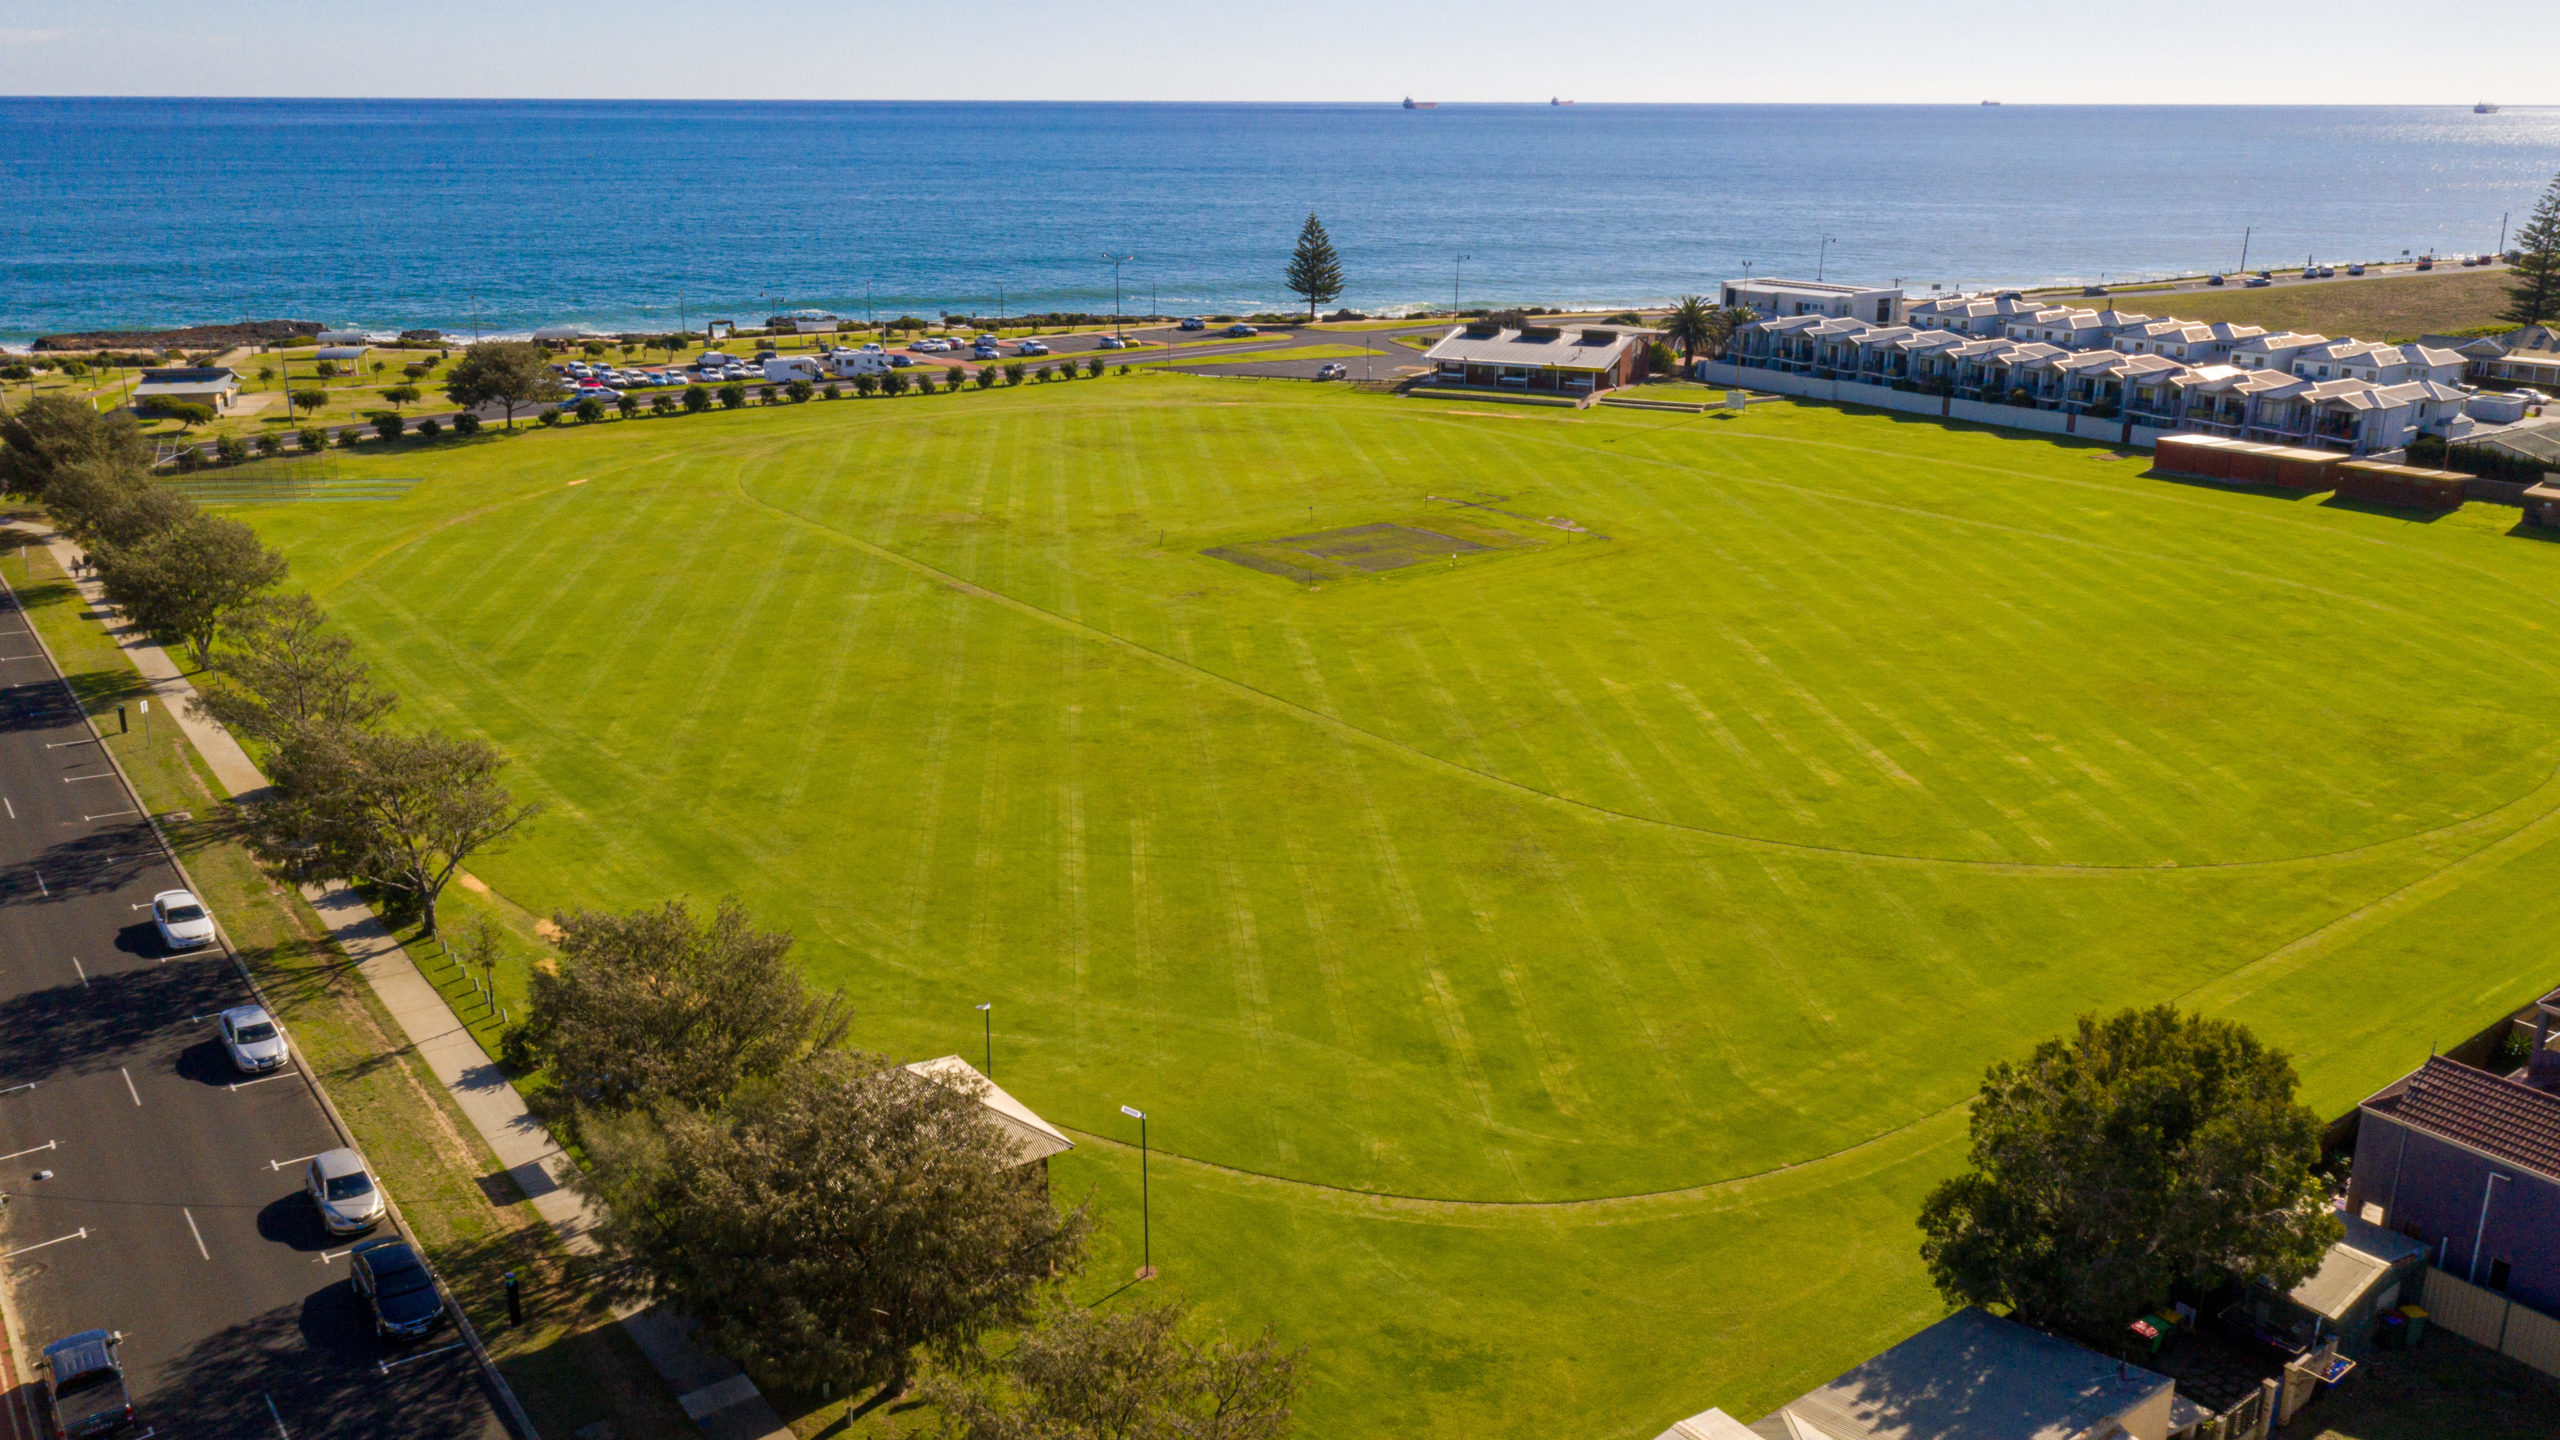 Aerial view of Bunbury Recreation Ground large green oval with ocean in the background